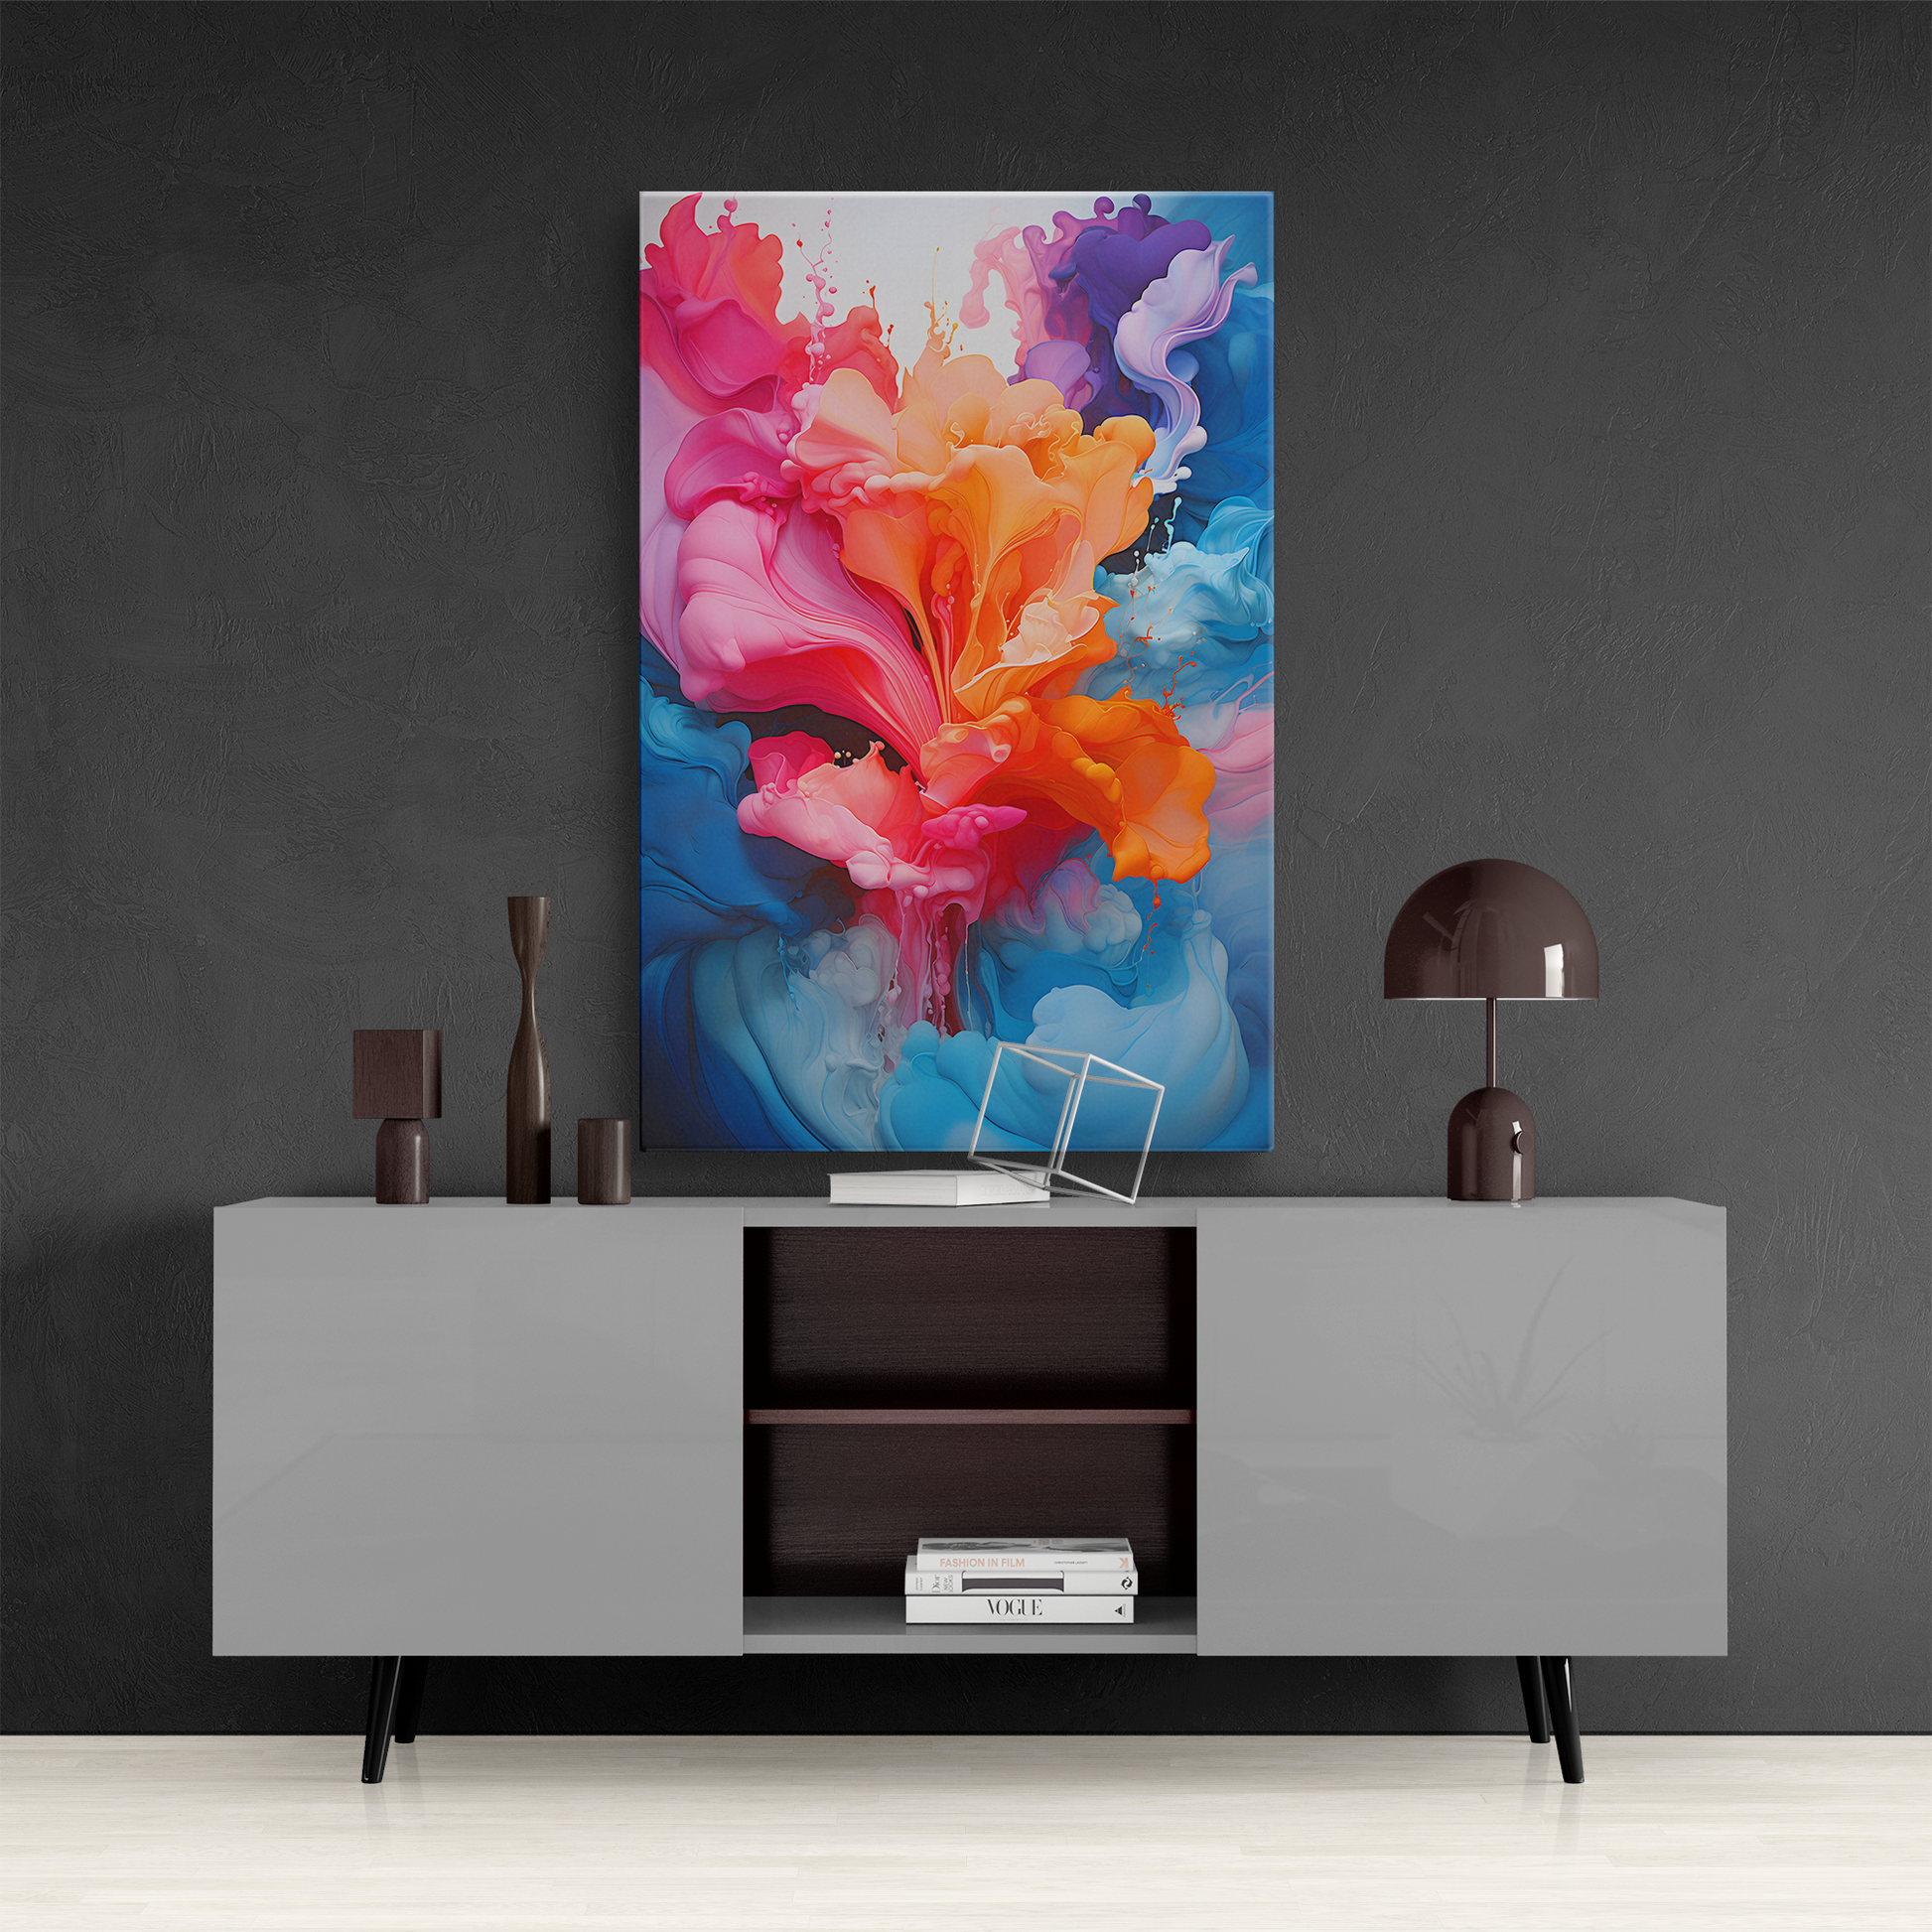 Liquid Dreamscape (Canvas)Liquid Dreamscape (Canvas  Matte finish, stretched, with a depth of 1.25 inches) Elevate your décor with RimaGallery’s responsibly made art canvases. Our eco-friendlRimaGallery